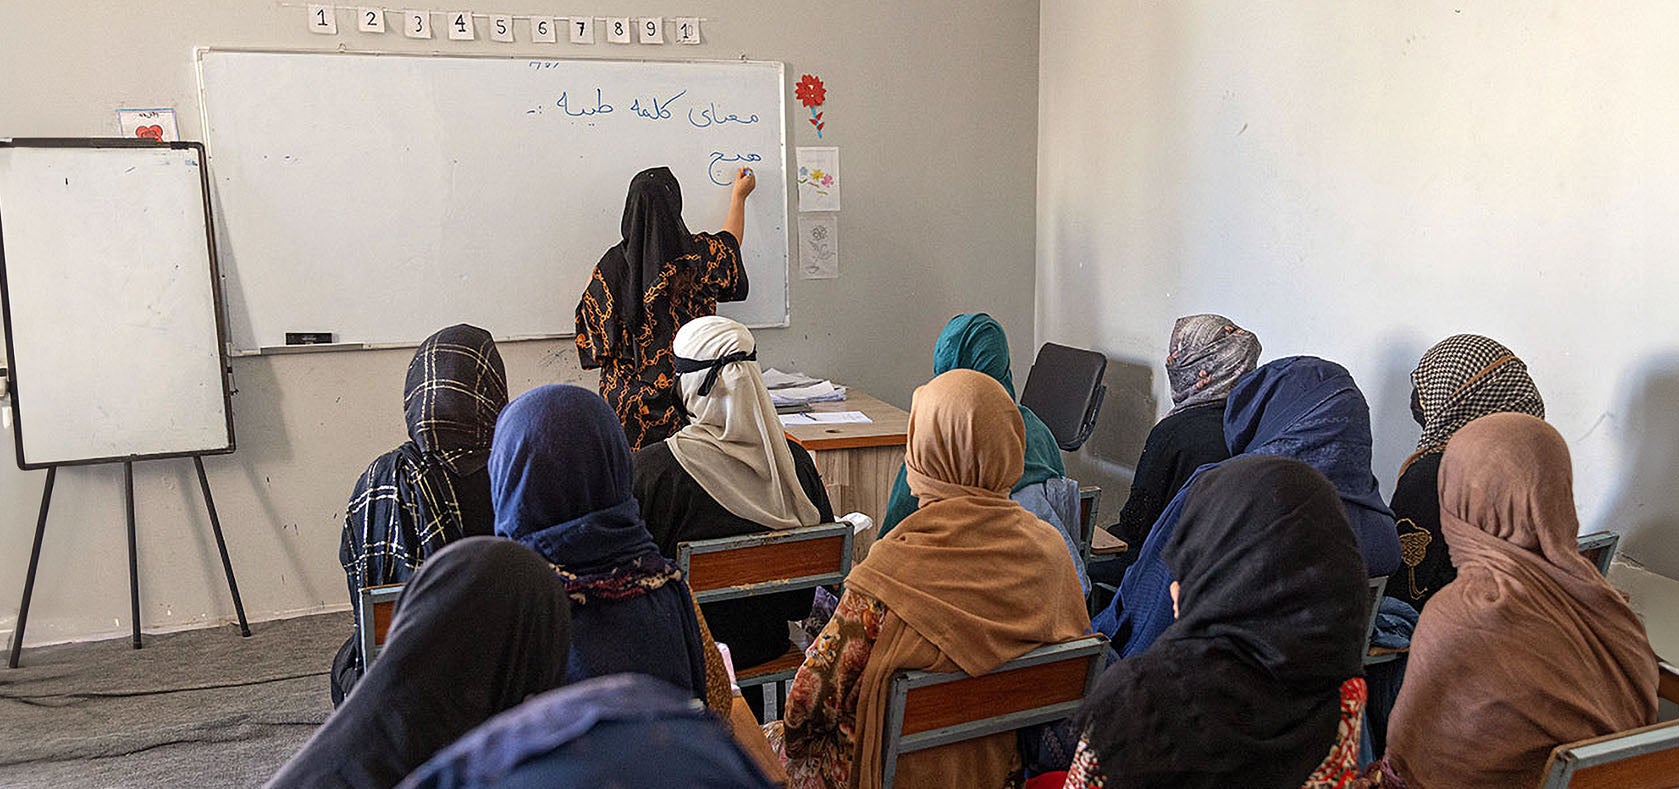 UN Women’s support includes a comprehensive set of training to help women’s organizations improve the way they operate. Photo: UN Women/Sayed Habib Bidell